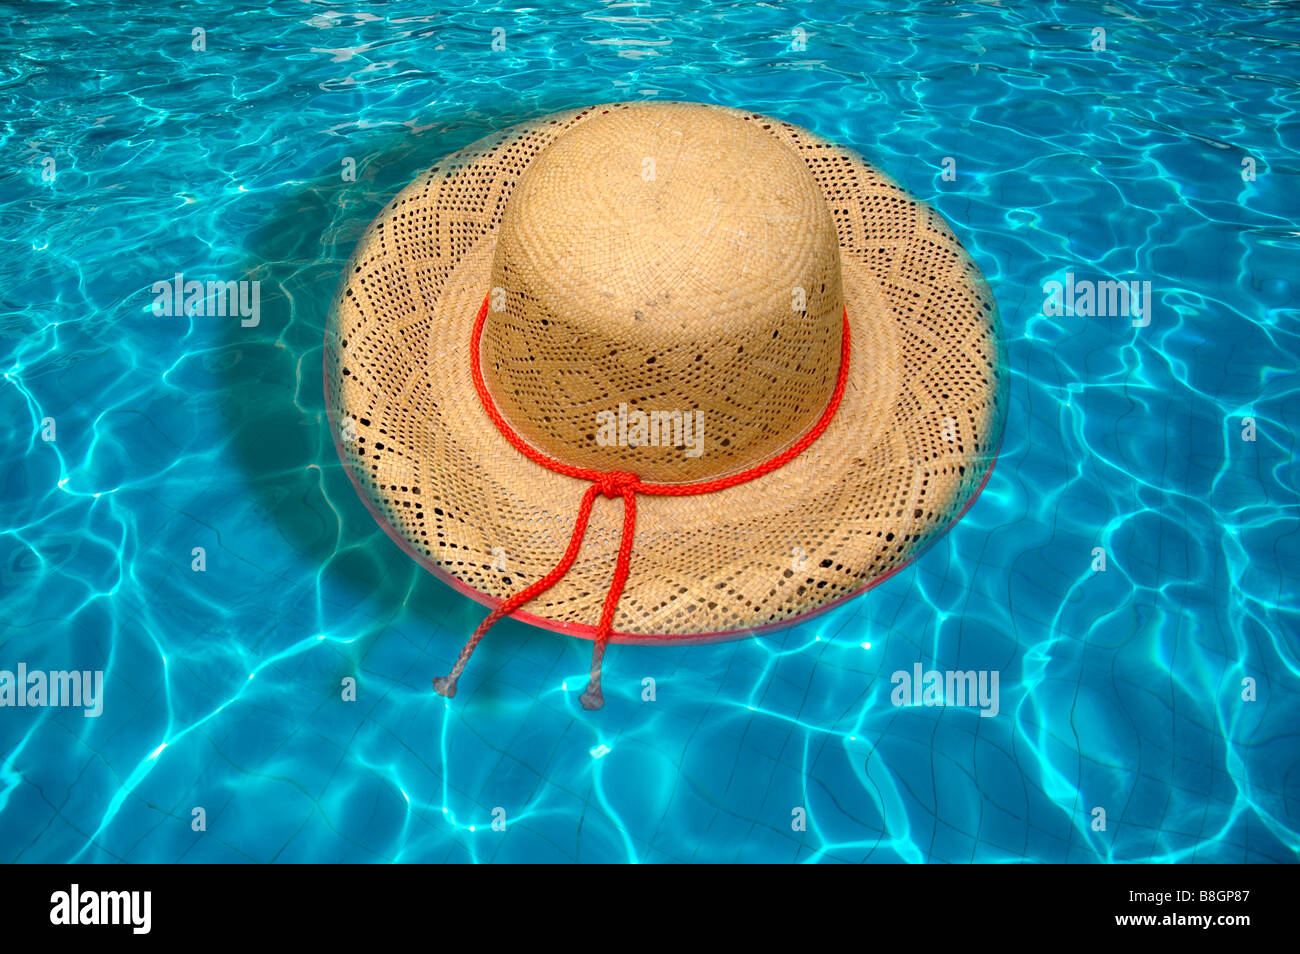 A summer straw hat floating on water of a swimming pool. Stock Photo